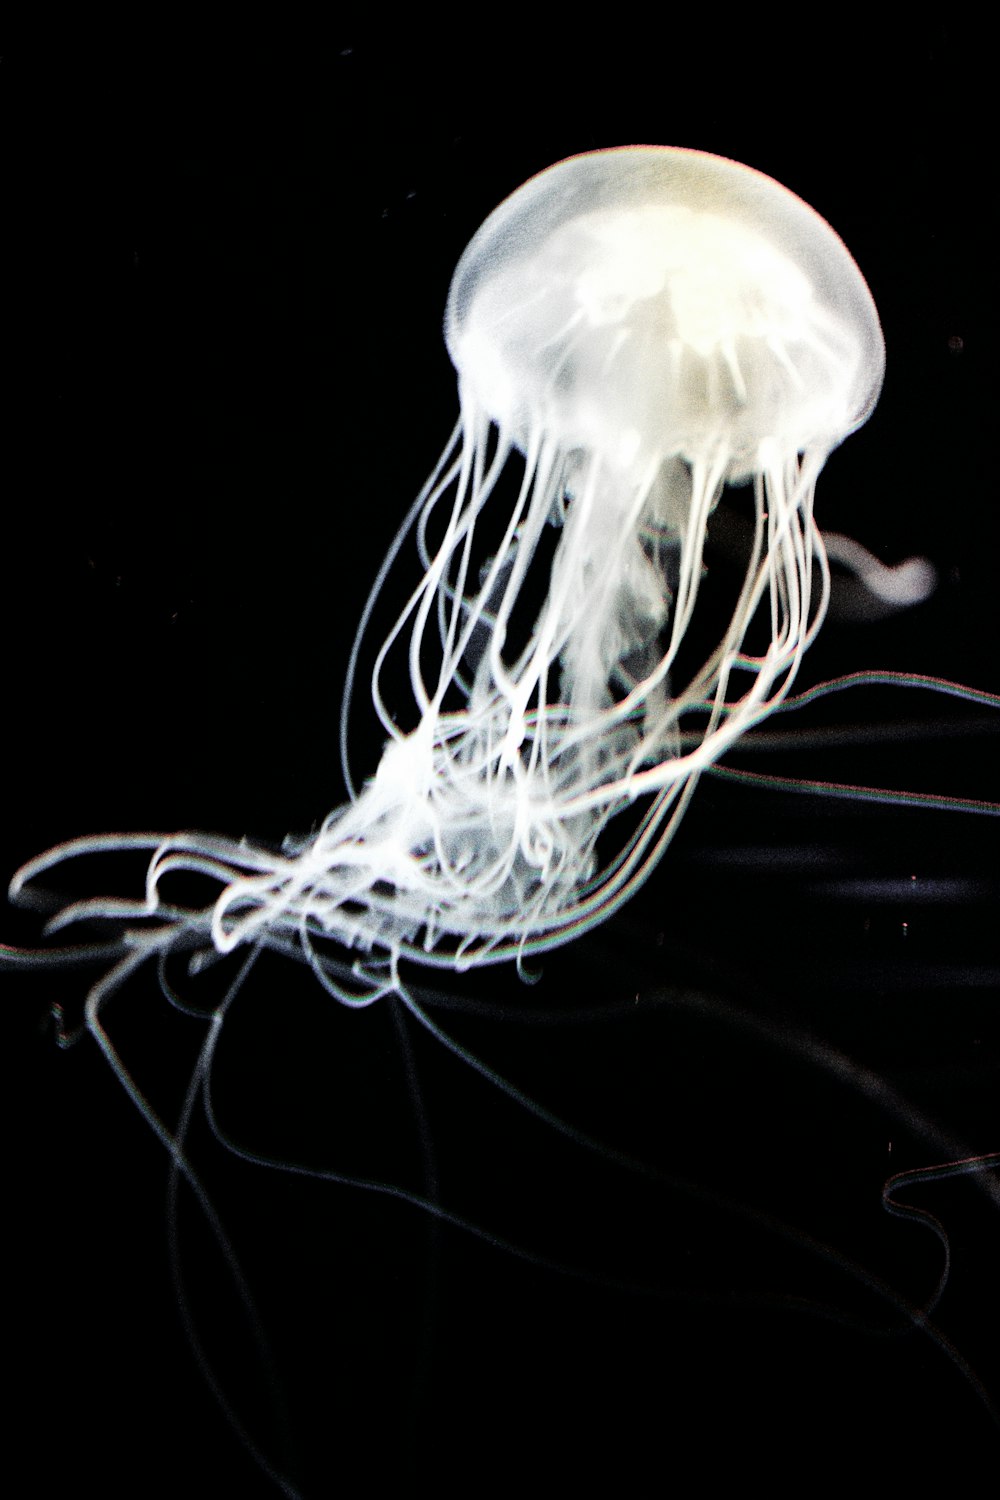 a close up of a jellyfish on a black background